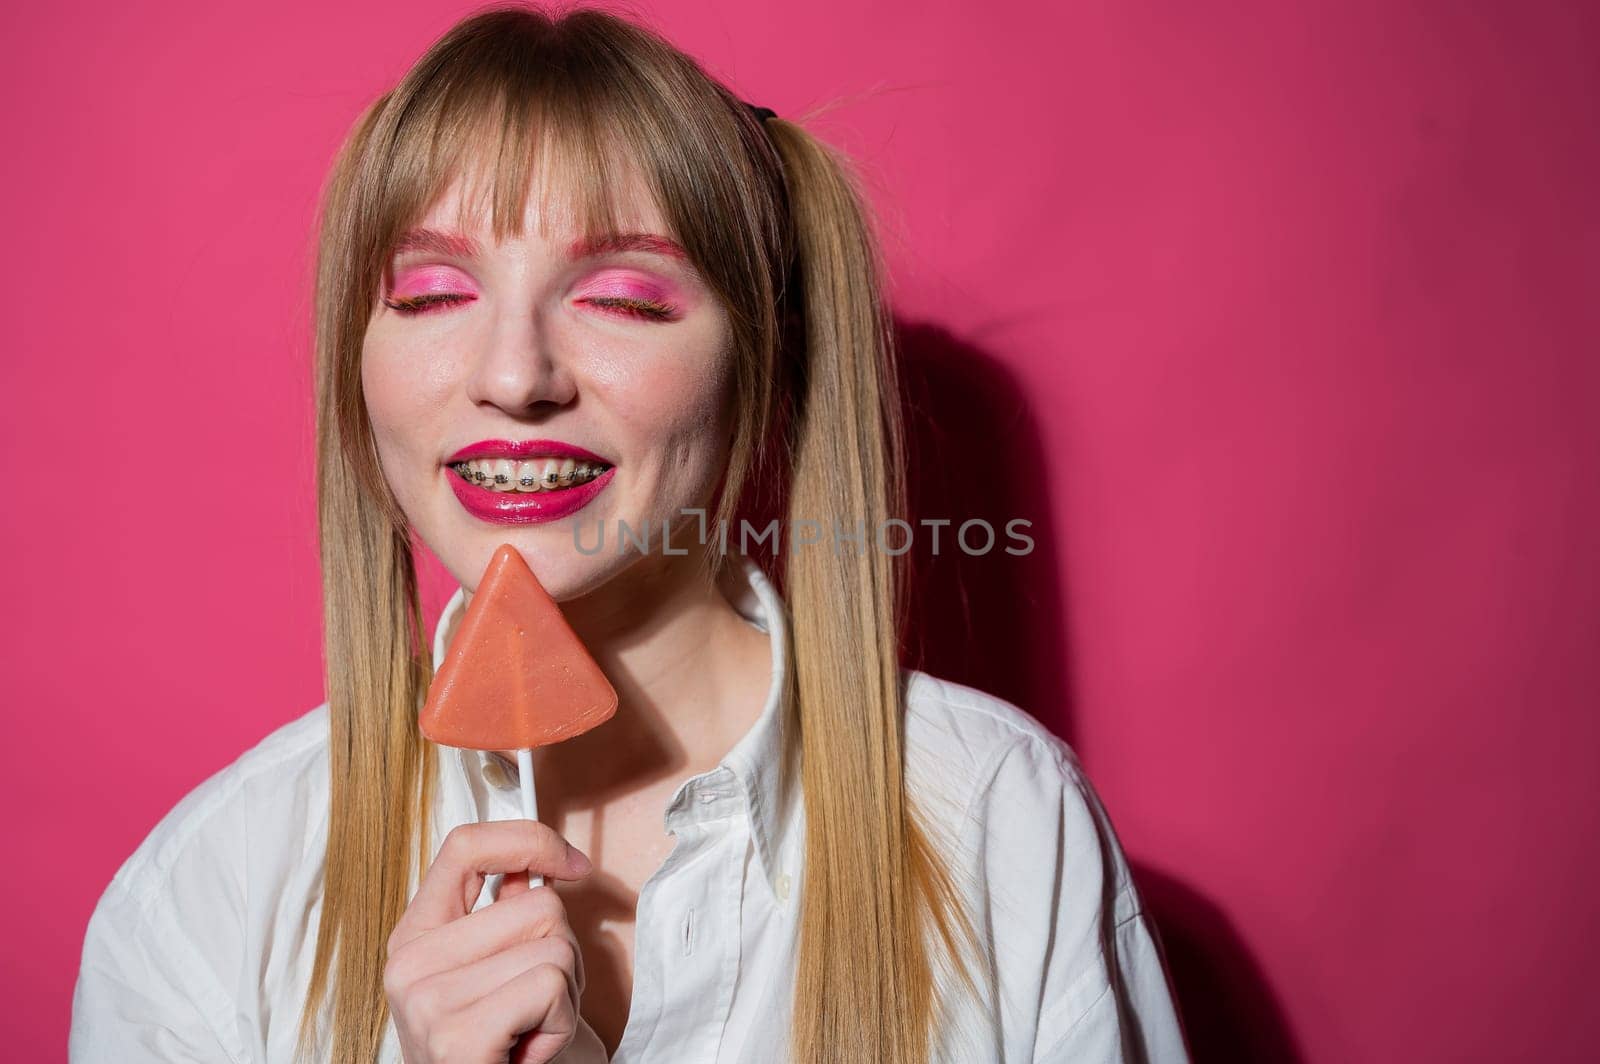 Portrait of a young woman with braces and bright makeup eating a lollipop on a pink background. by mrwed54